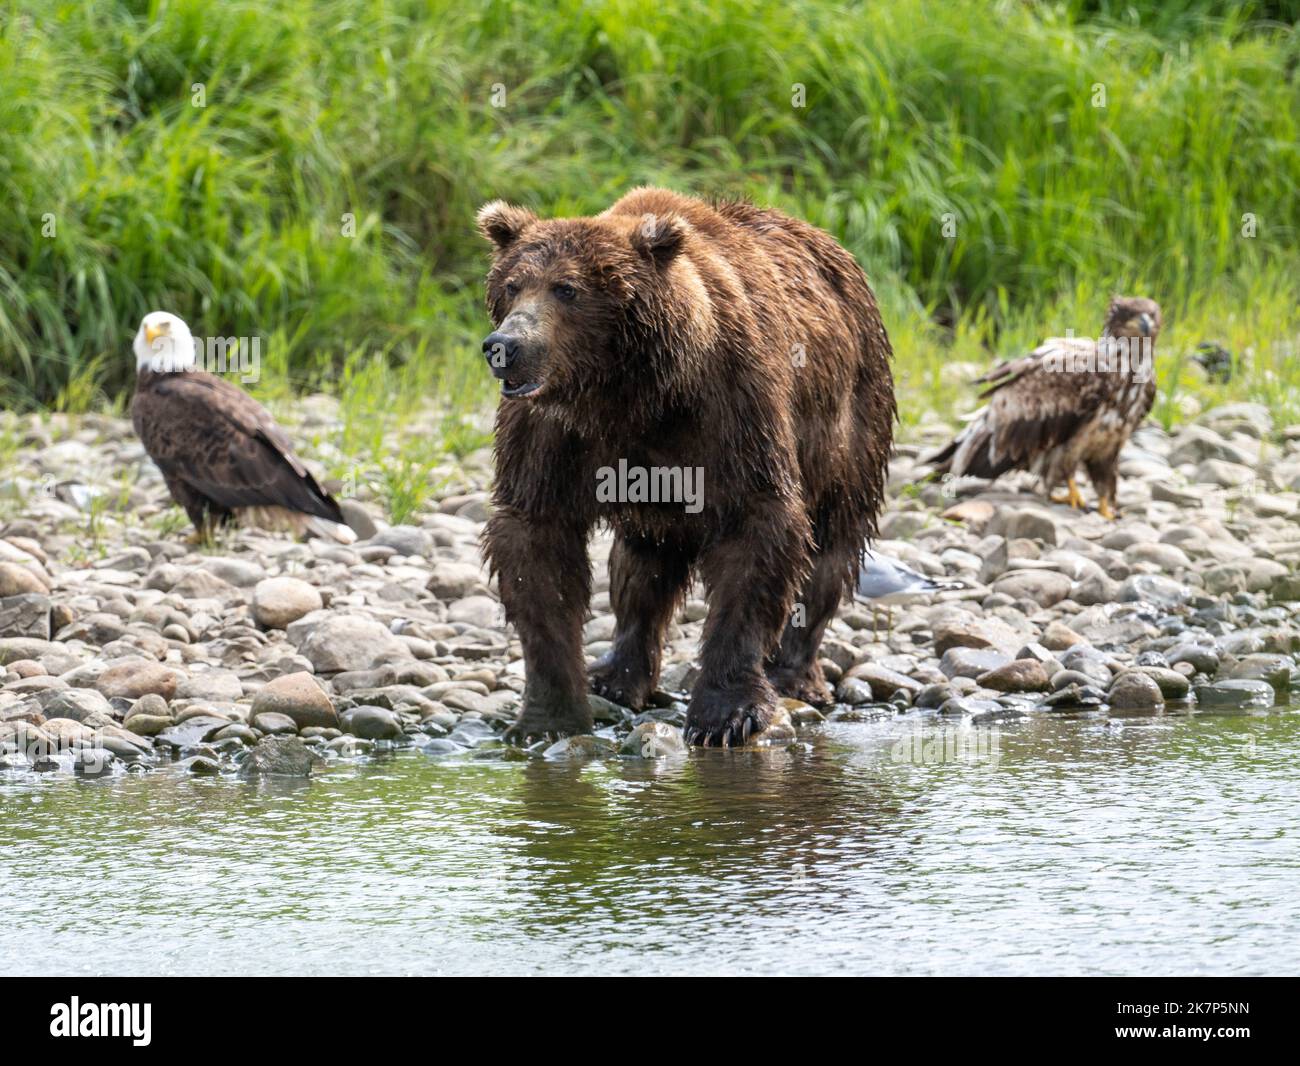 Alaskan brown bear standing in shallow stream with adult and immature bald eagle on the shore in the background. Stock Photo